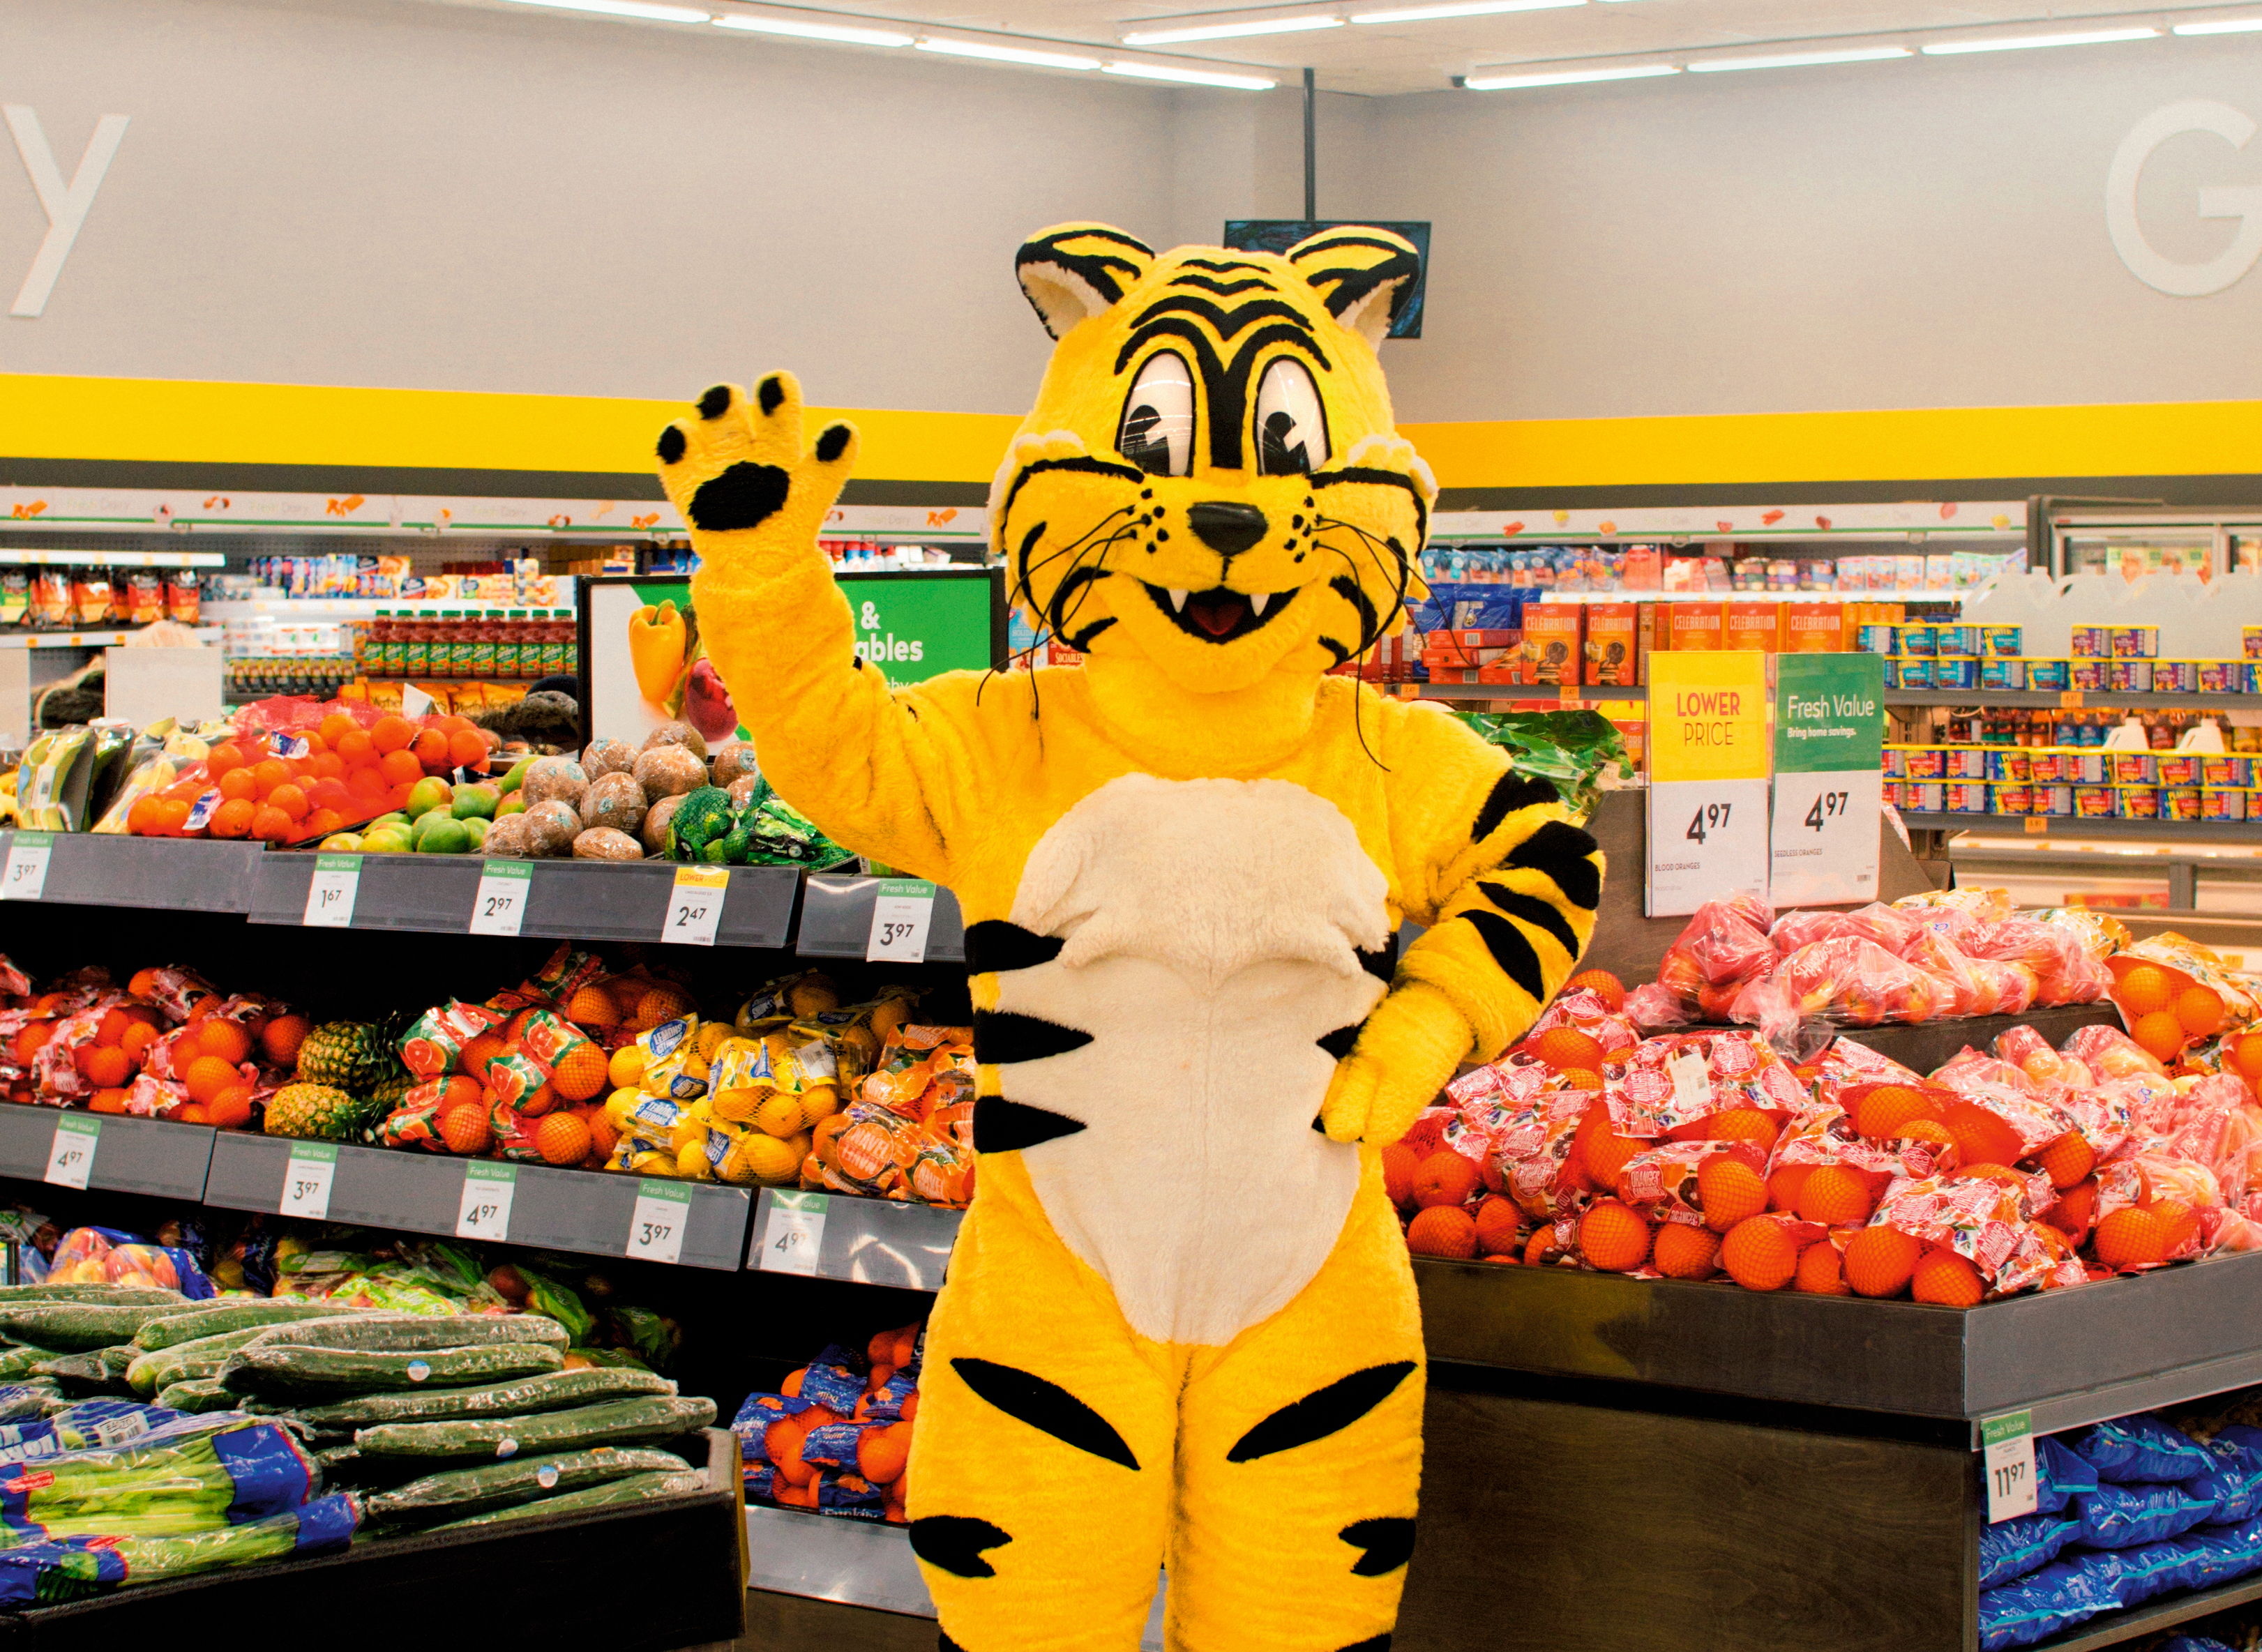 Giant Tiger planning to increase store count to 300 amid COVID-19 -  National